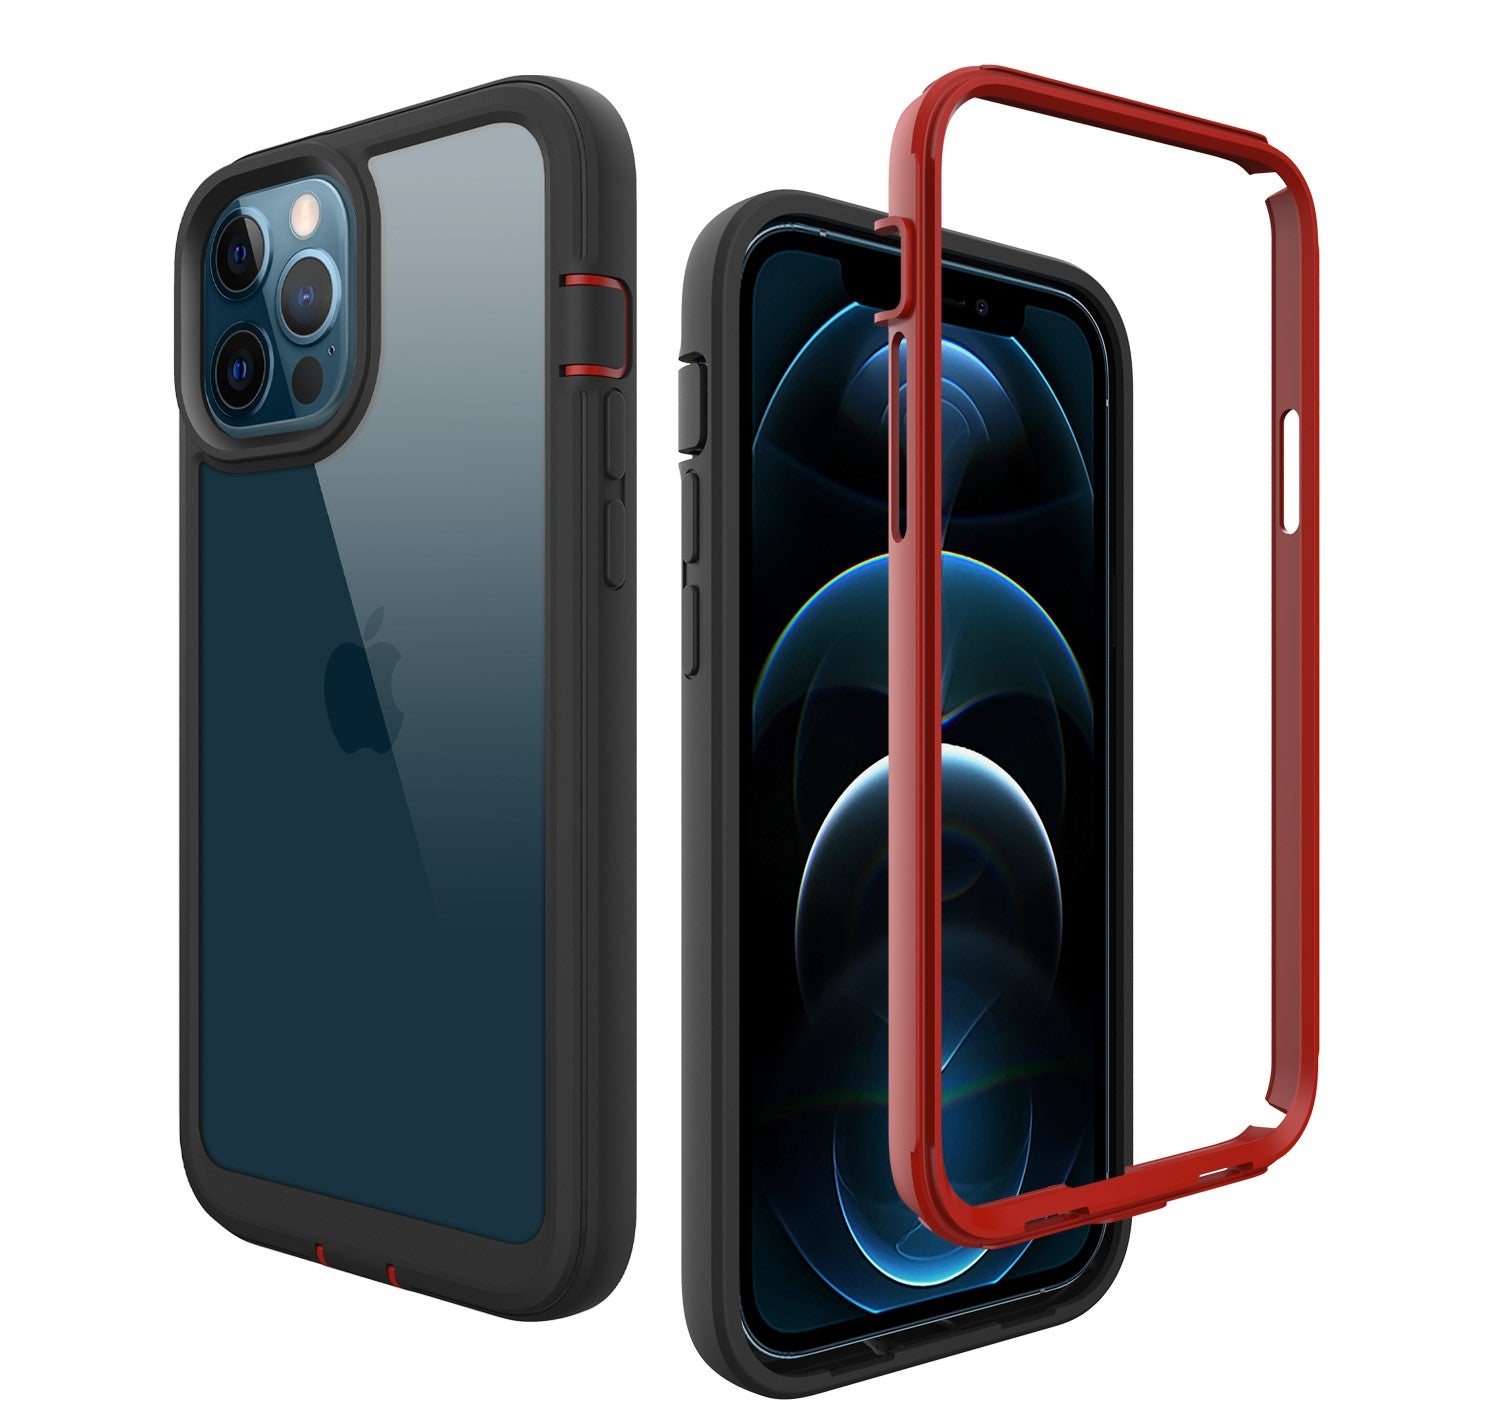 ZEOS Terrain Clear Case for iPhone 12 Pro Max